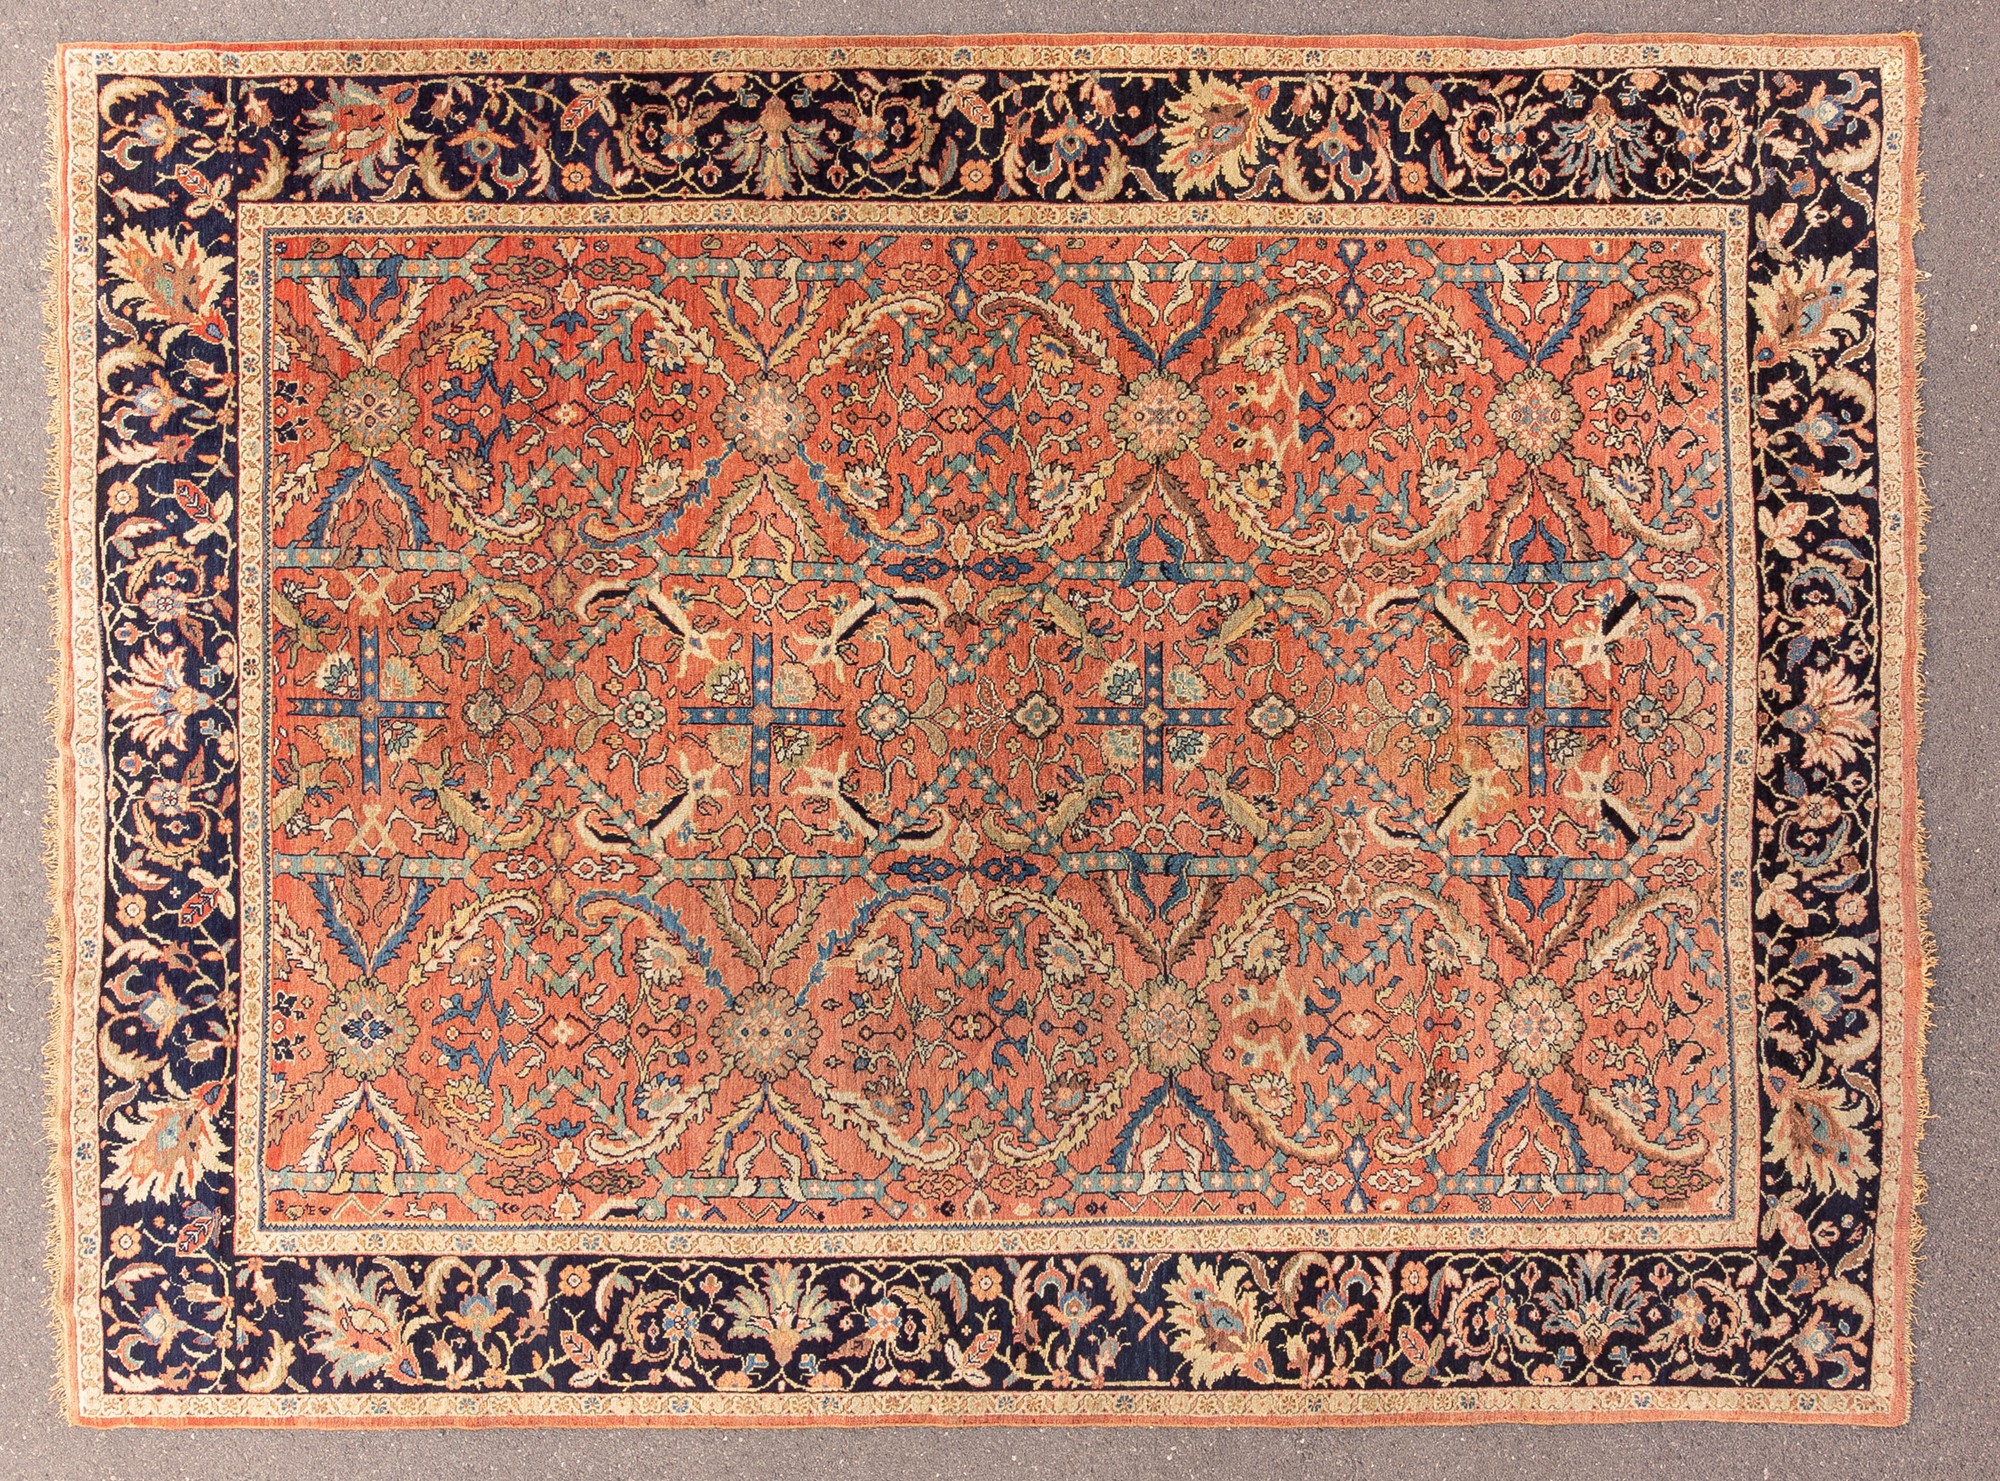 Persian carpet from the mid-20th century